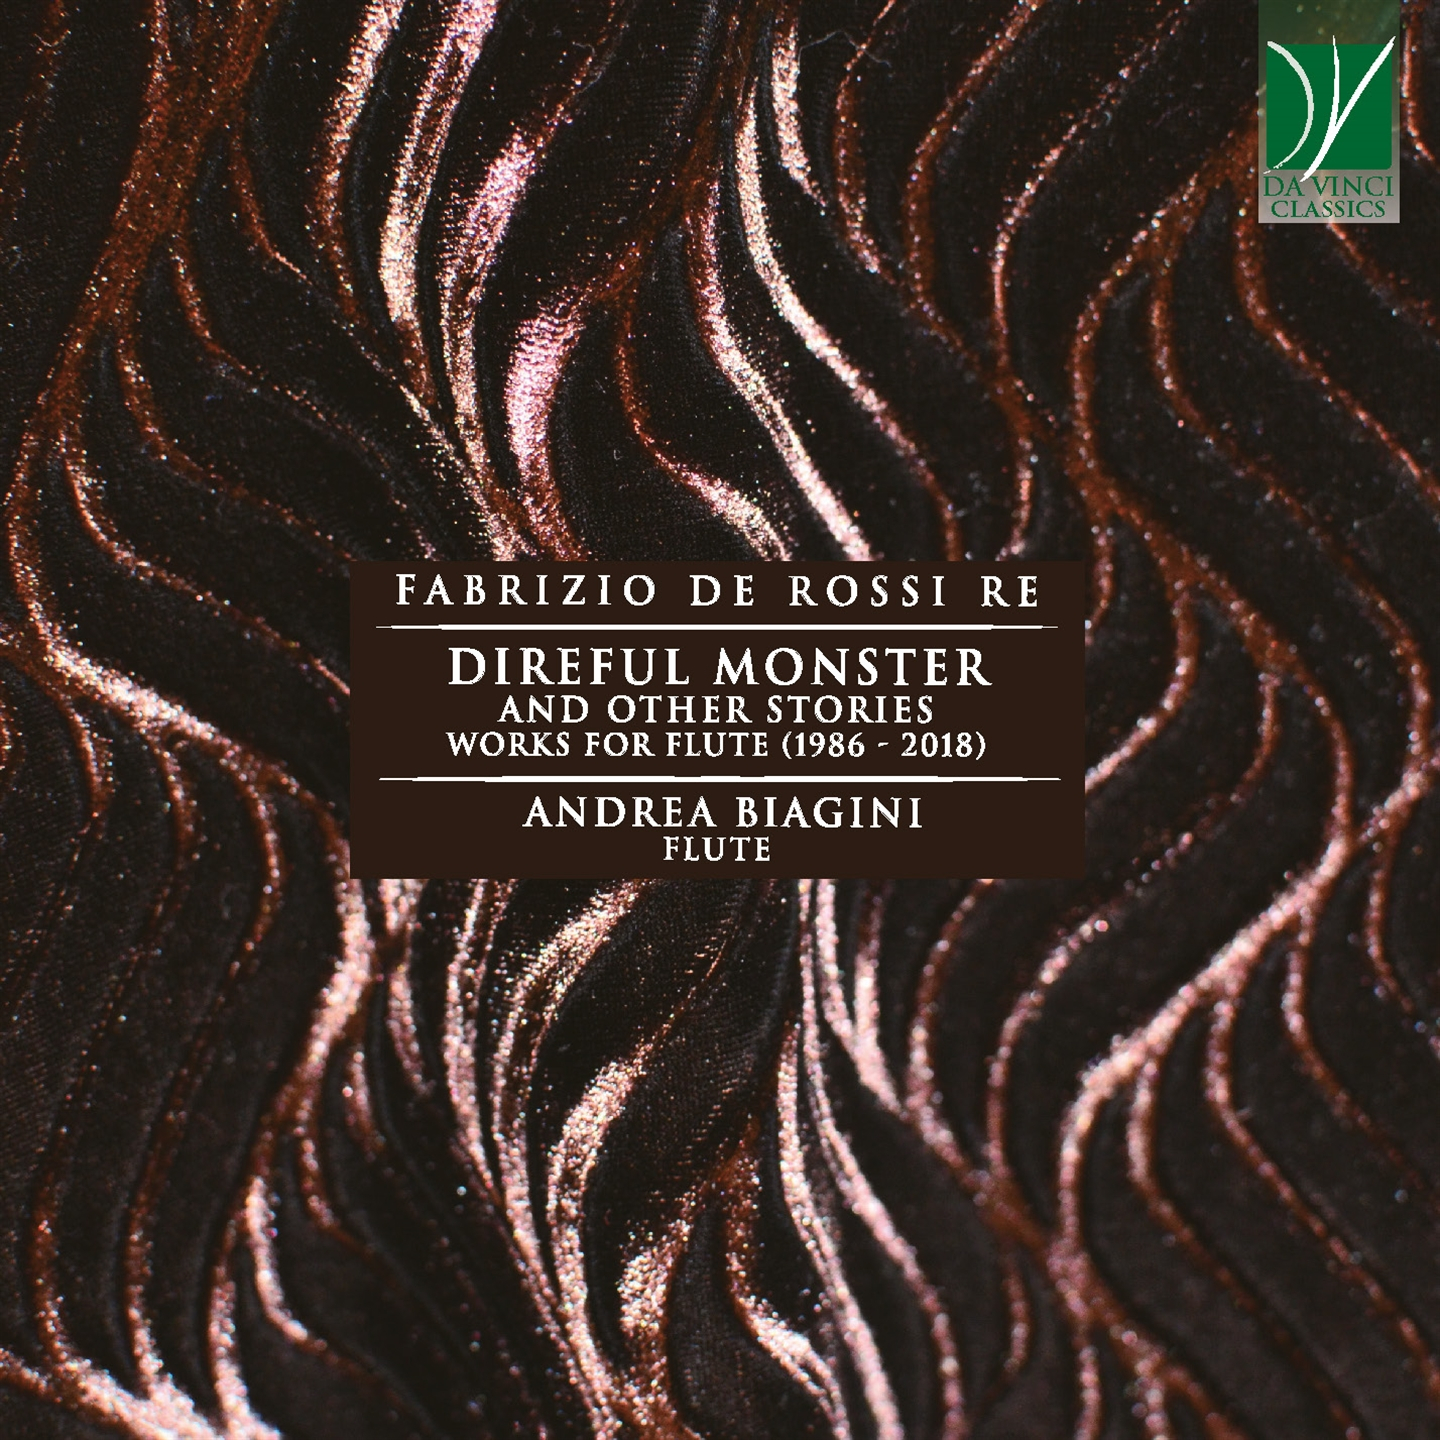 FABRIZIO DE ROSSI RE: DIREFUL MONSTER AND OTHER STORIES, WORKS FOR FLUTE (1986